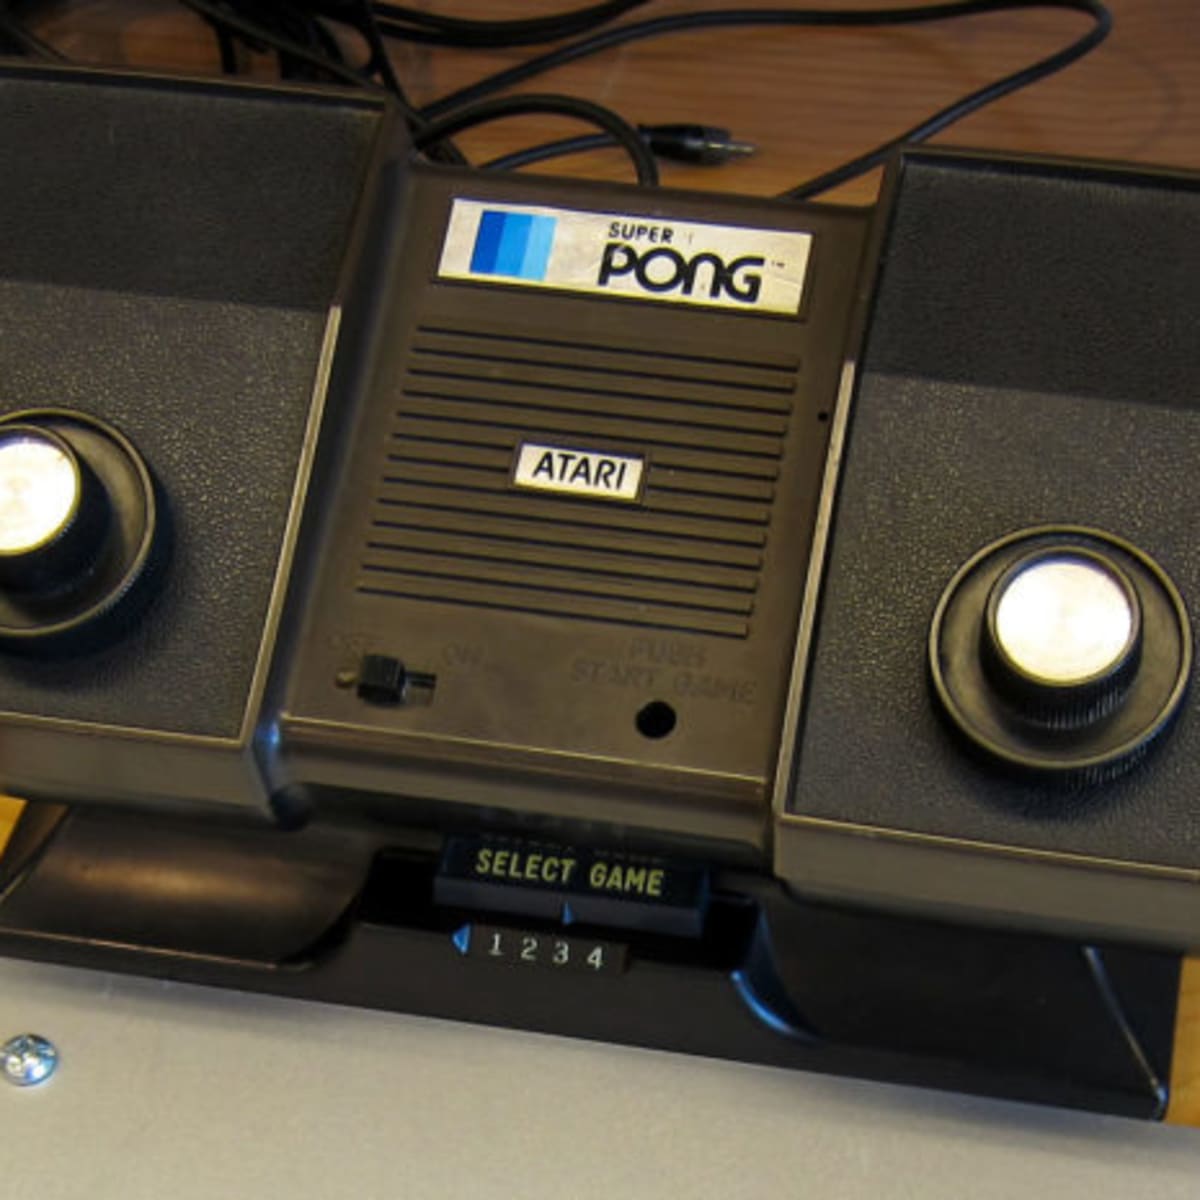 The Atari 2600 at 45: The Console That Brought Arcade Games Home